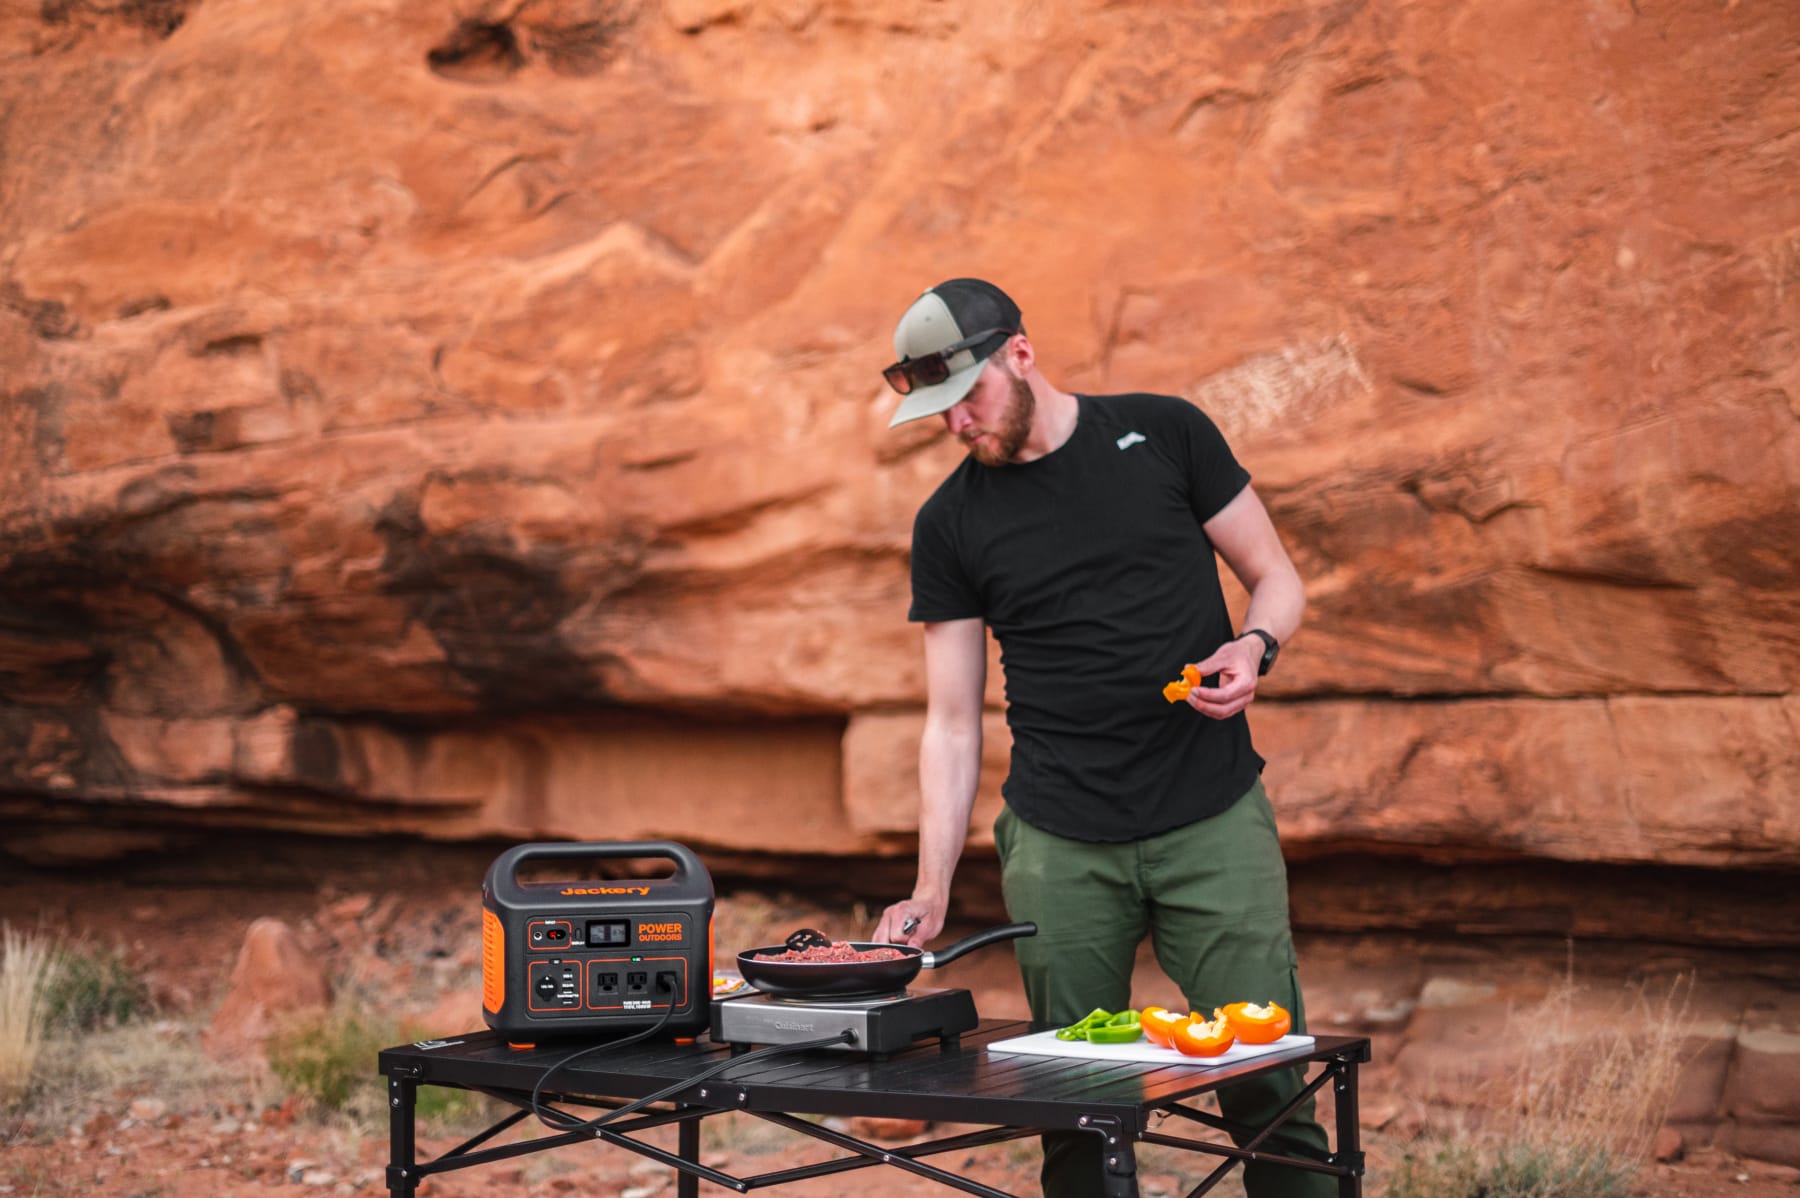 A man cooking outdoors using a hotplate and portable power station.